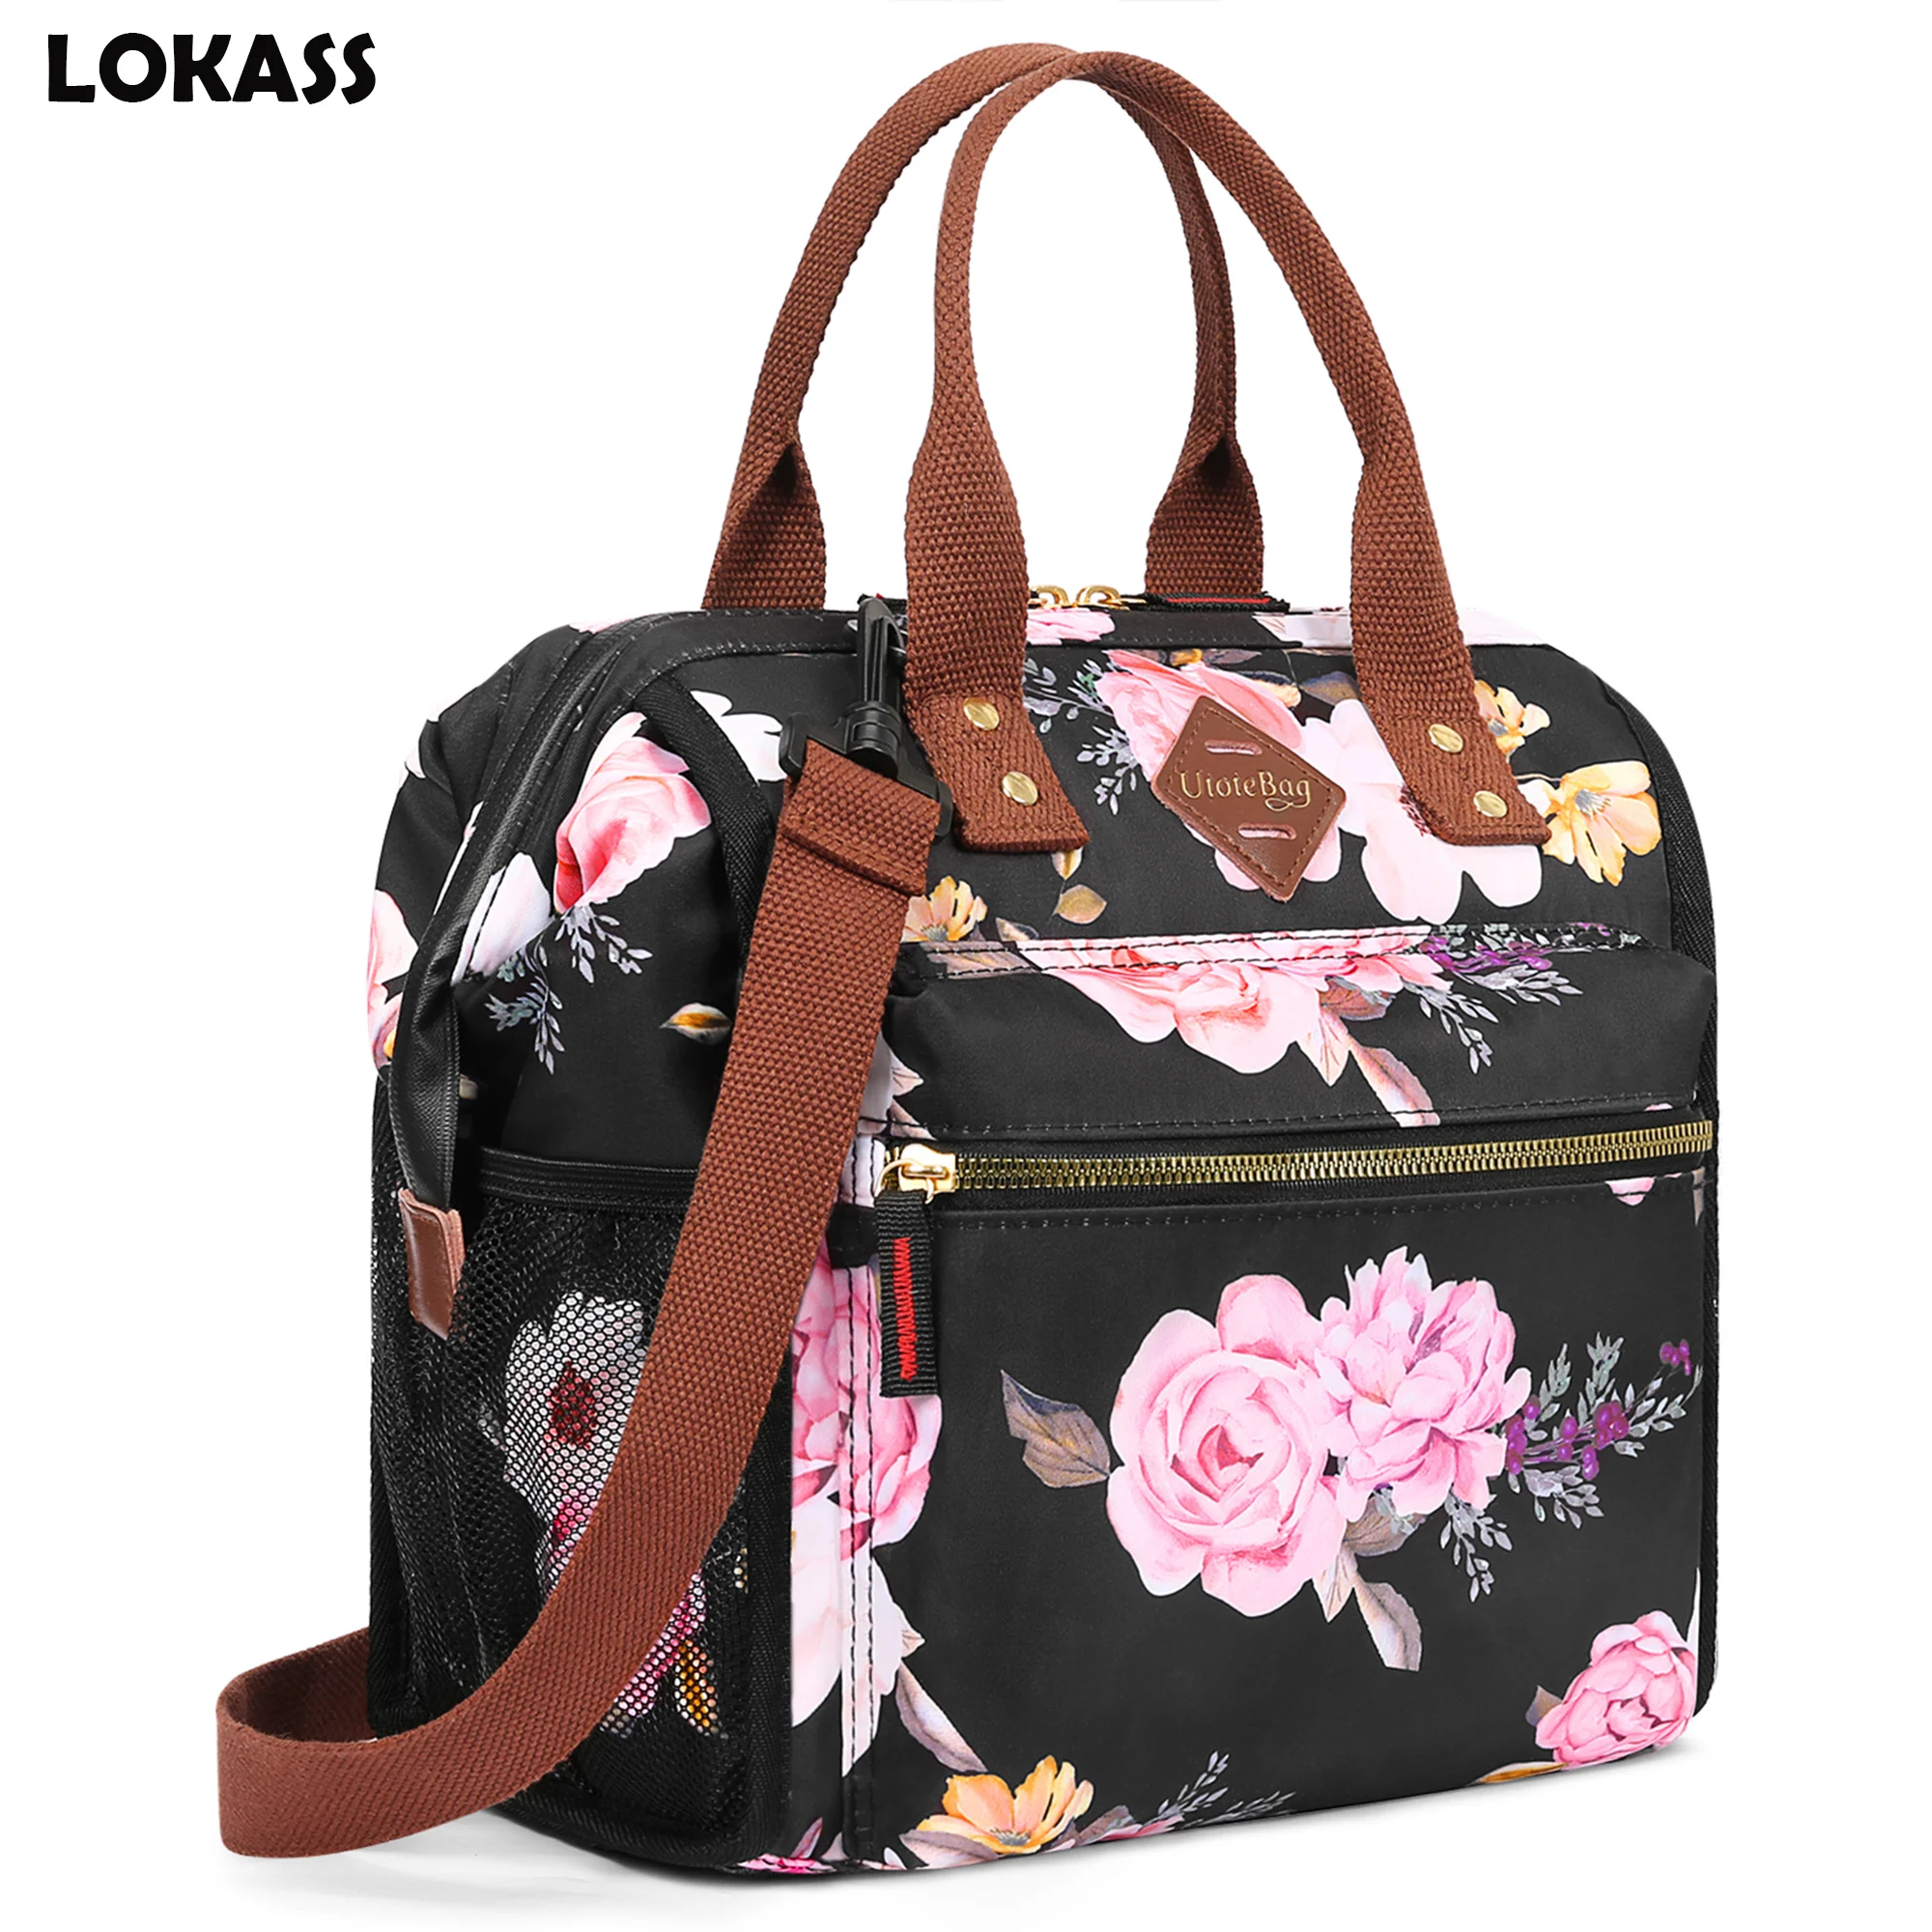 LOKASS Lunch Bag Women Insulated Lunch Box Water-resistant Lunch Tote Thermal Lunch Cooler Soft Liner Lunch Bags for Girls Lady custom gilmore girls bag warm cooler thermal insulated lunch box for women kids work school food picnic tote bags